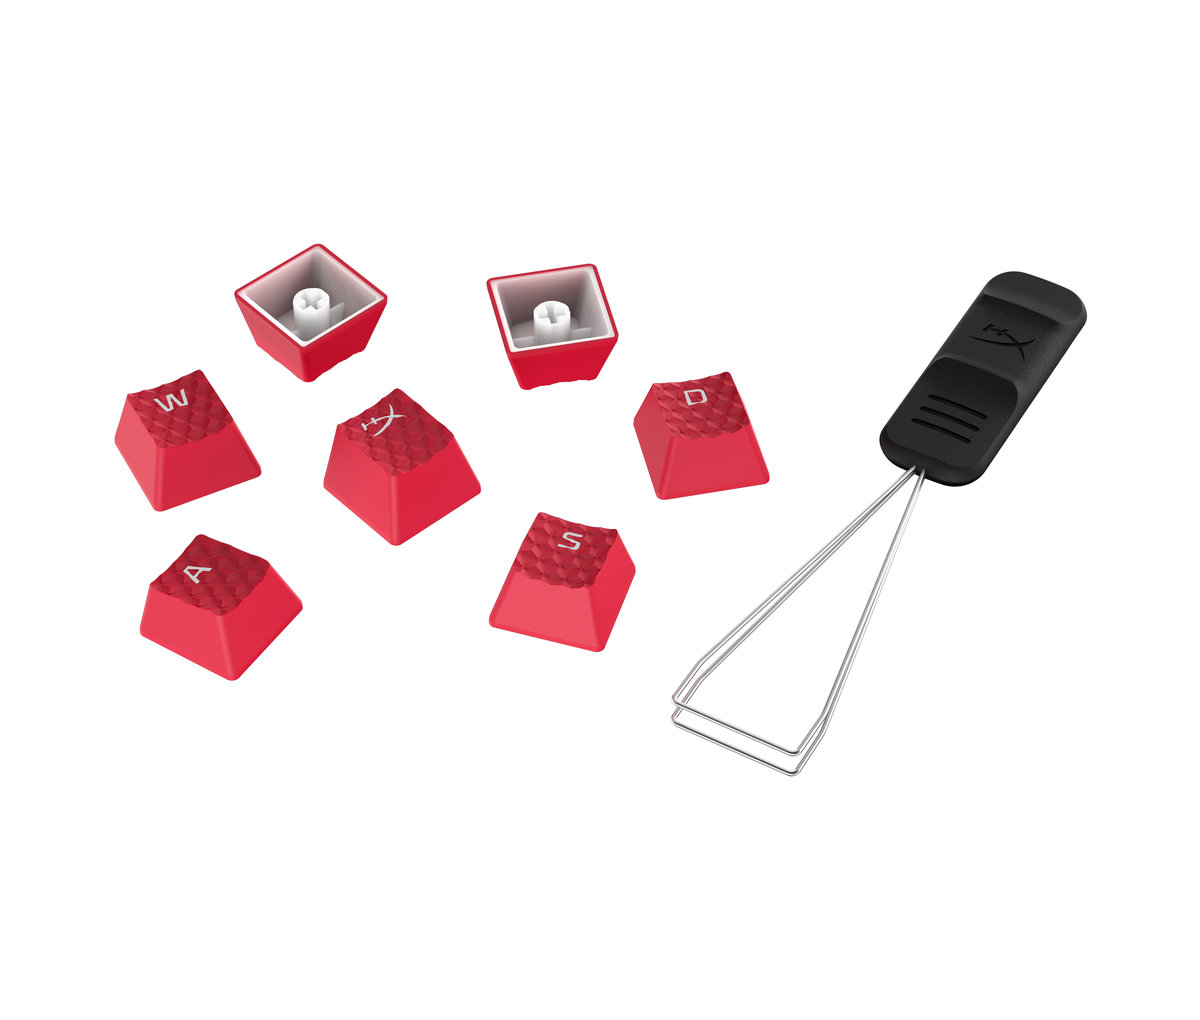 HyperX Rubber Keycaps - Gaming Accessory Kit - Red (US Layout) (519T6AA)